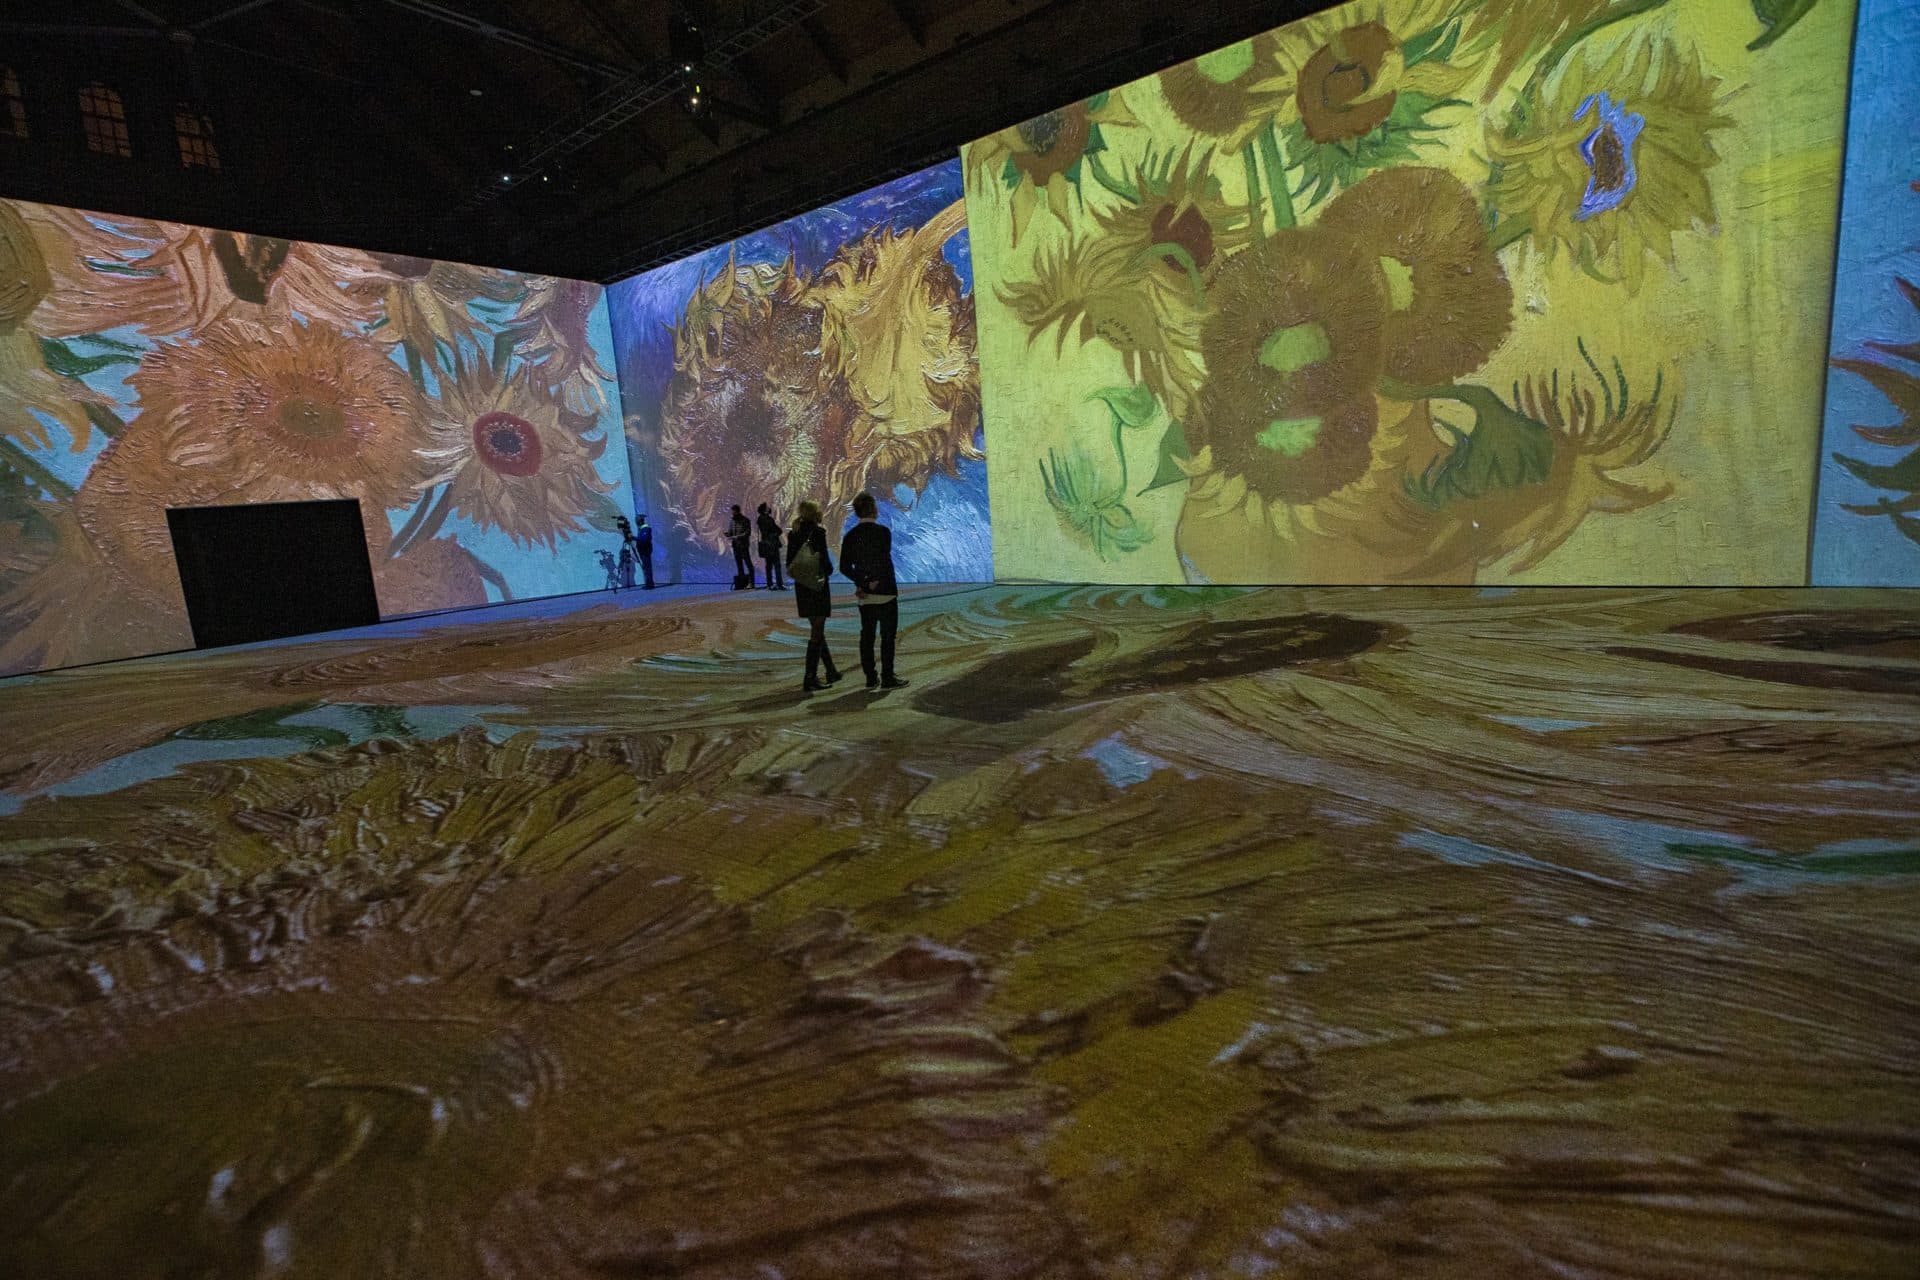 Vincent van Gogh’s &quot;Sunflowers&quot; projected onto the walls and floor during a press preview of &quot;Imagine Van Gogh&quot; at the SoWa Power Station in the South End. (Jesse Costa/WBUR)